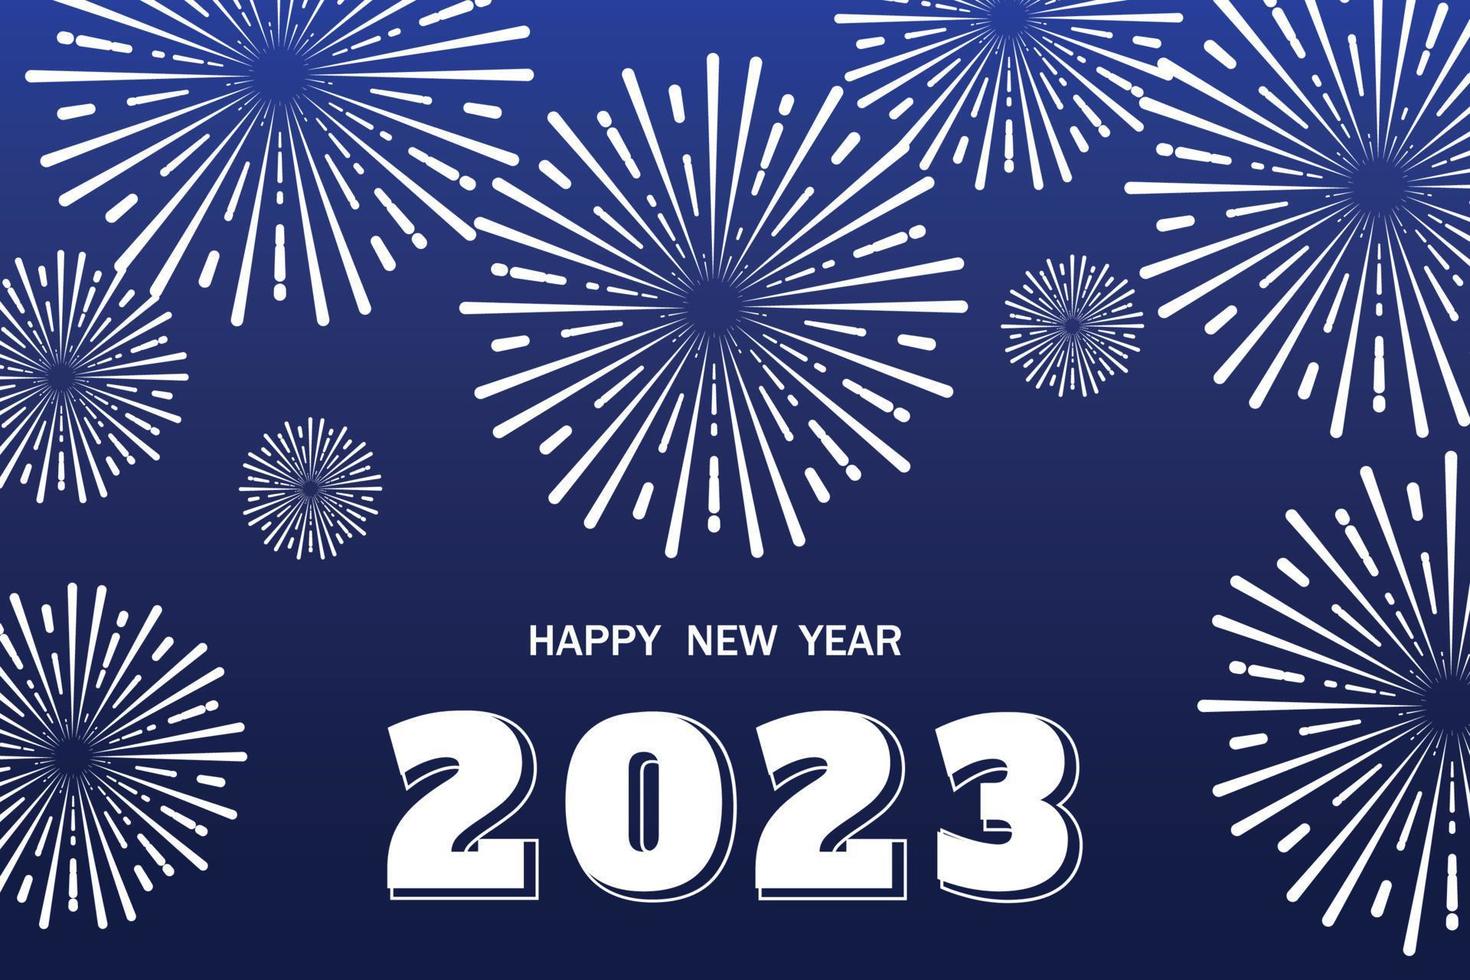 Fireworks new year 2023 background vector